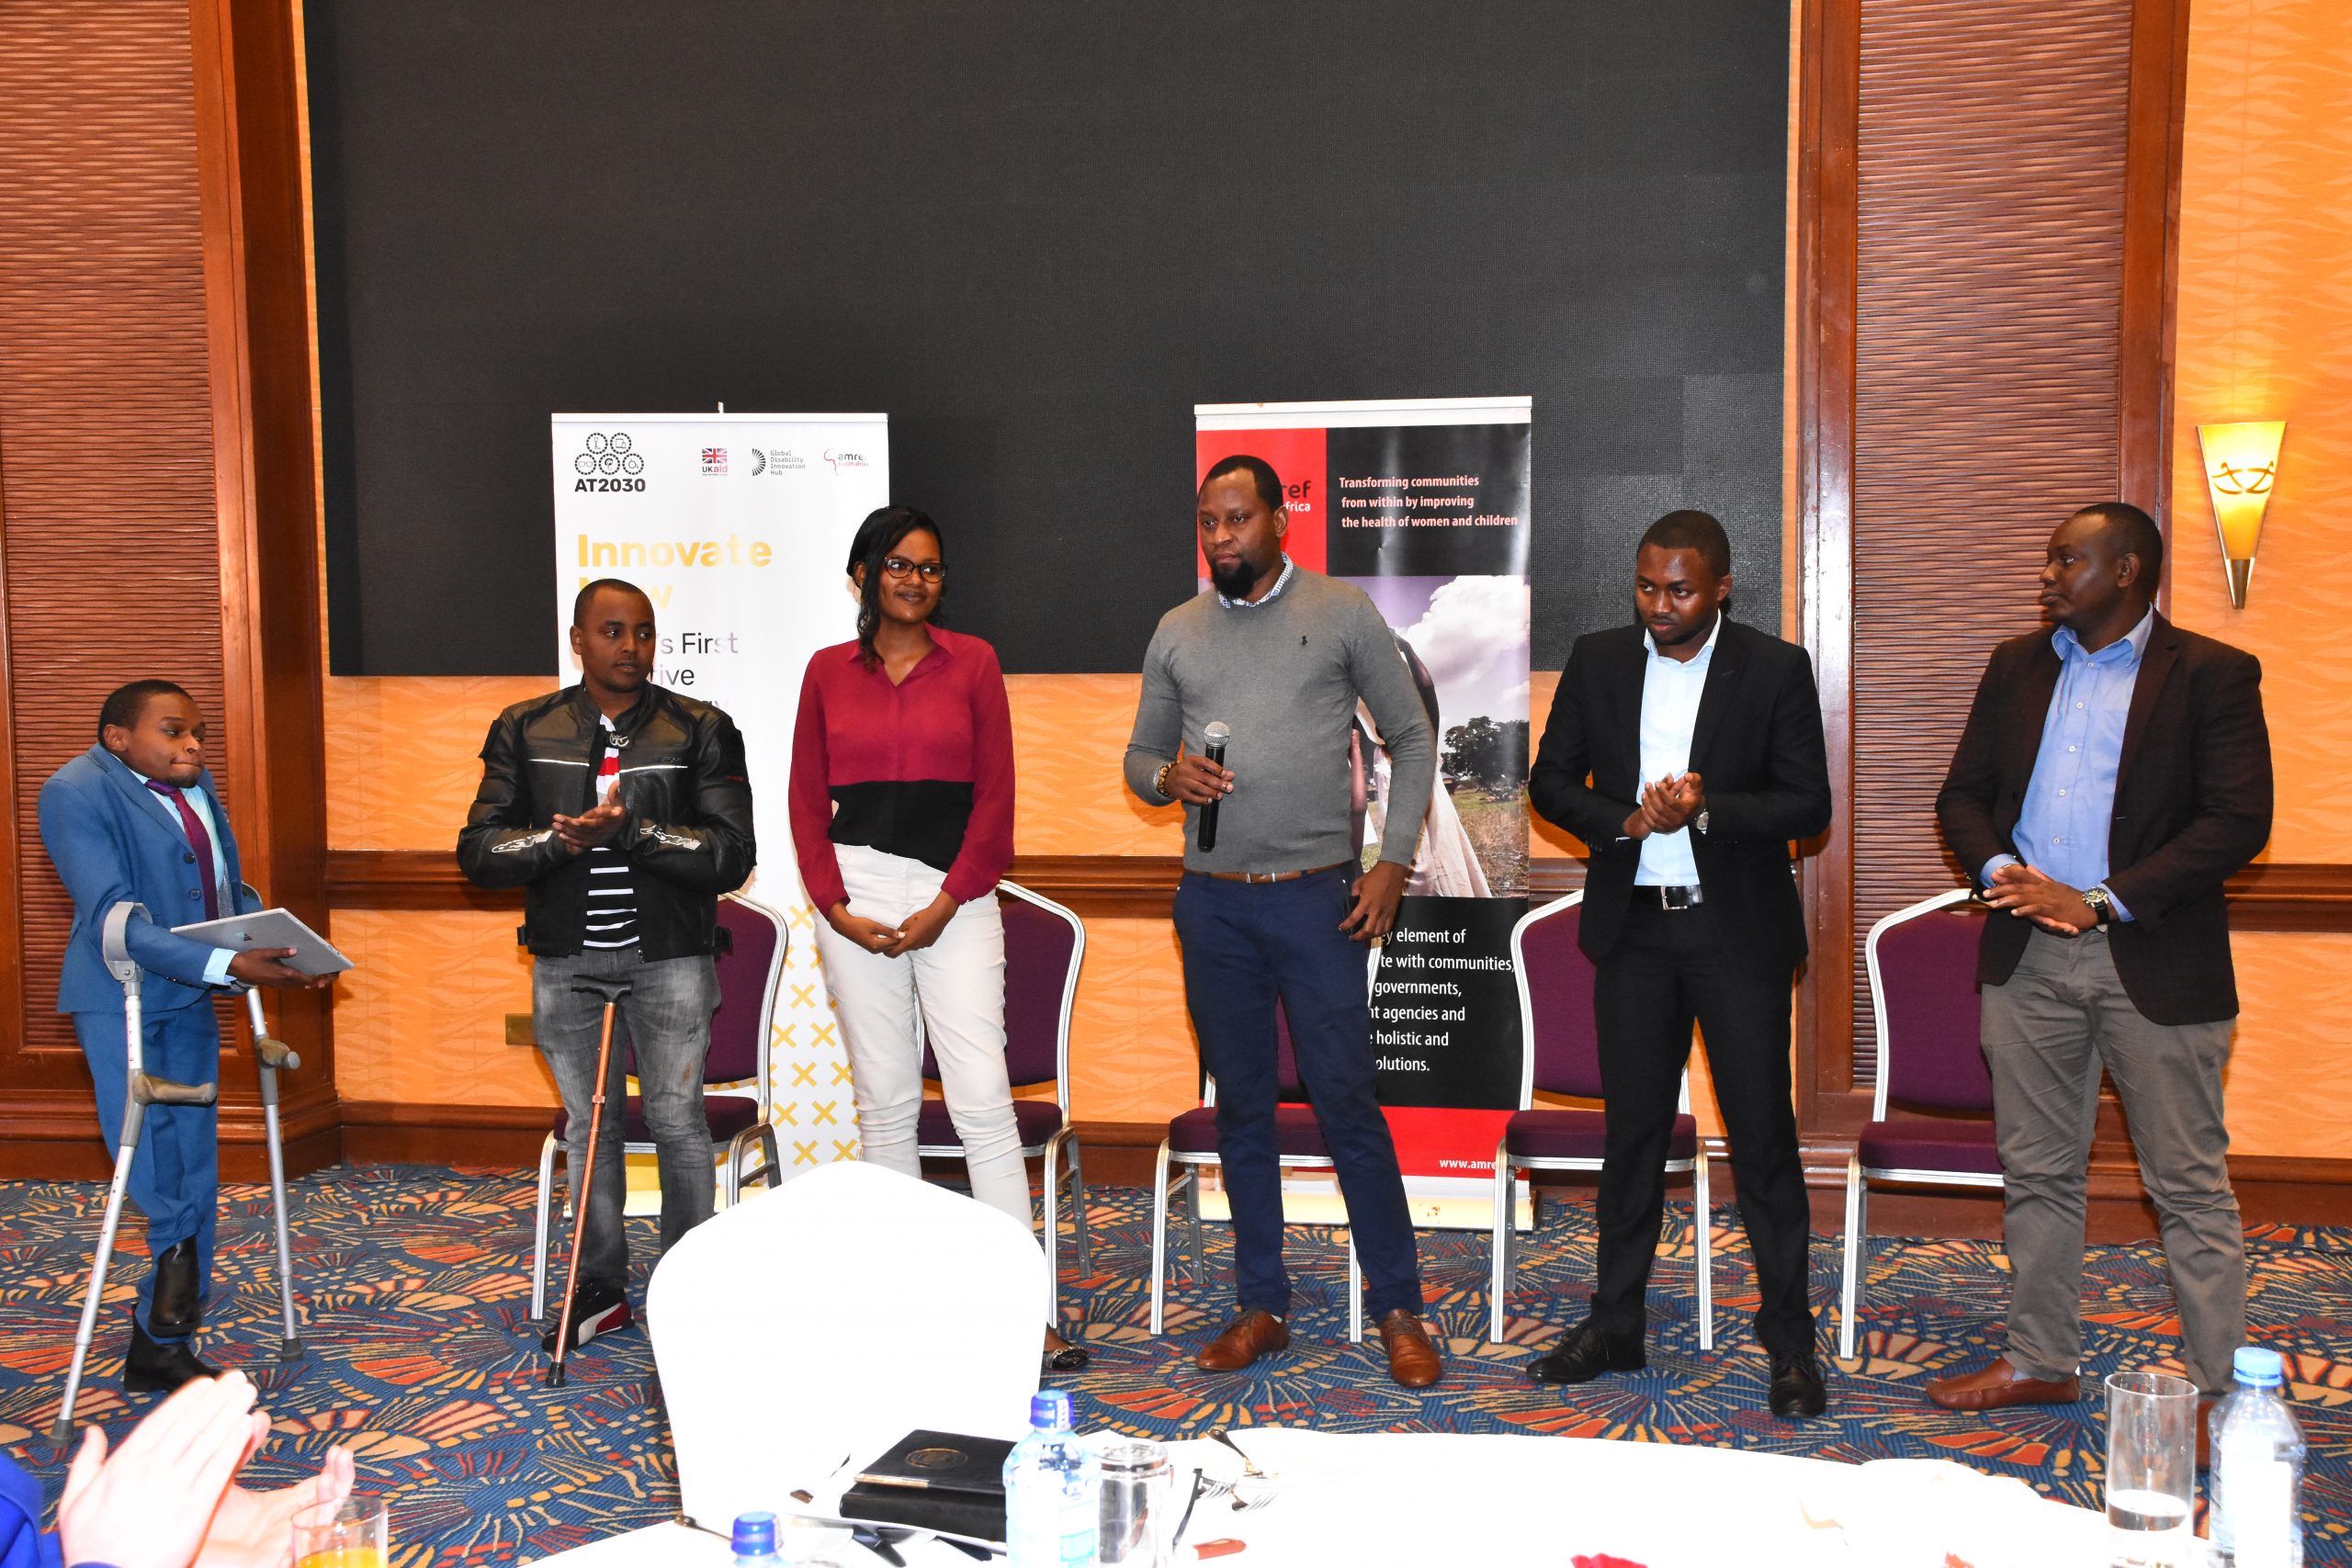 A group of innovators from cohort 1.0 stand in front of an audience